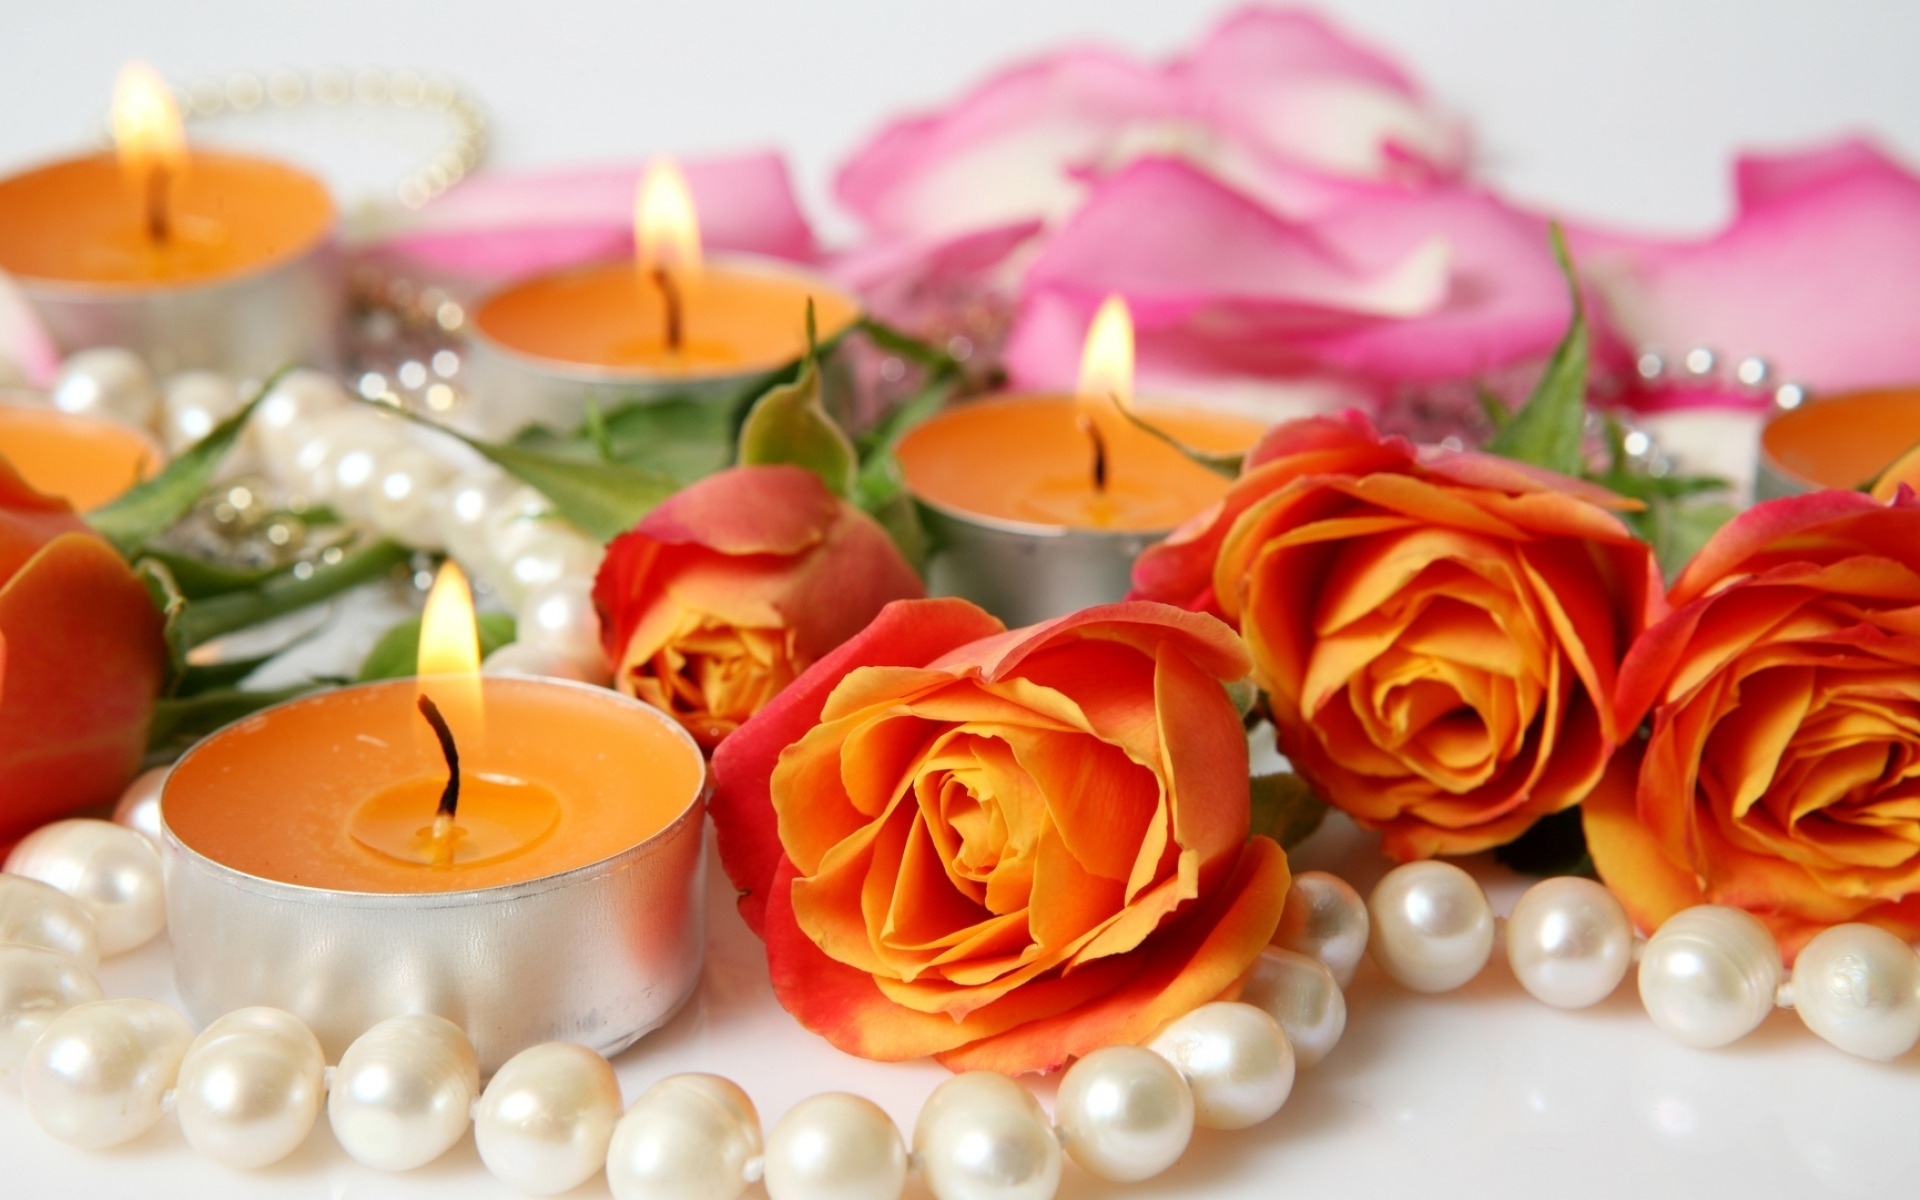 Jewelry Pearls Rose Candles 1920x1200